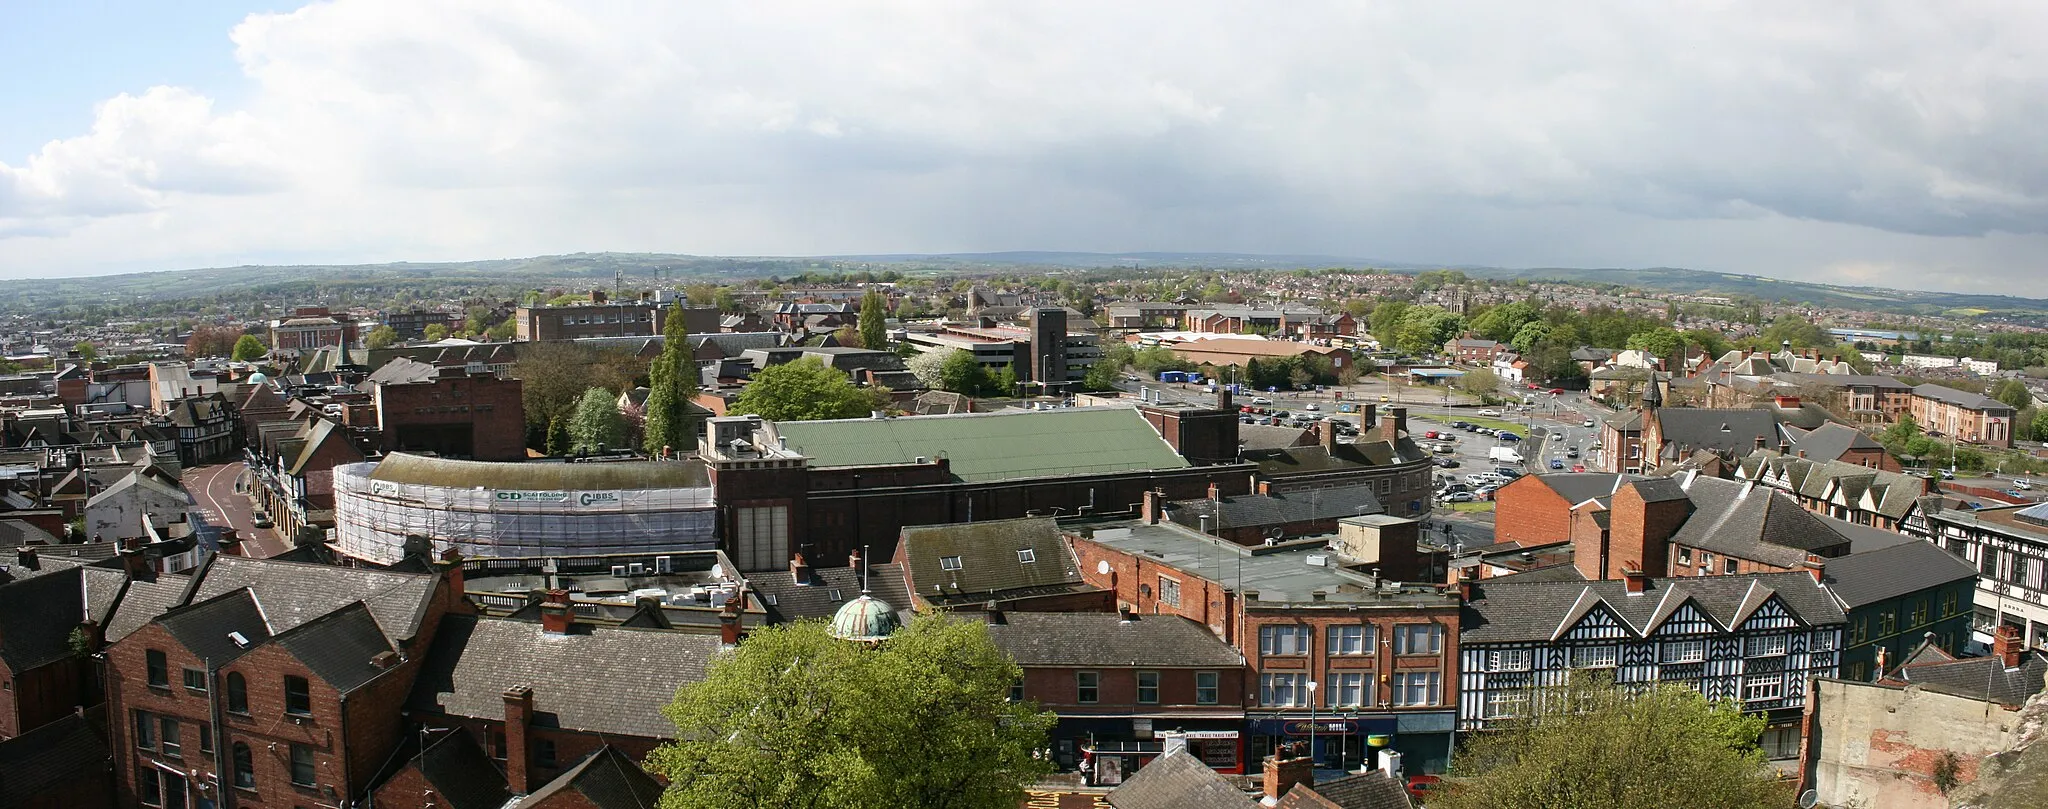 Image of Chesterfield